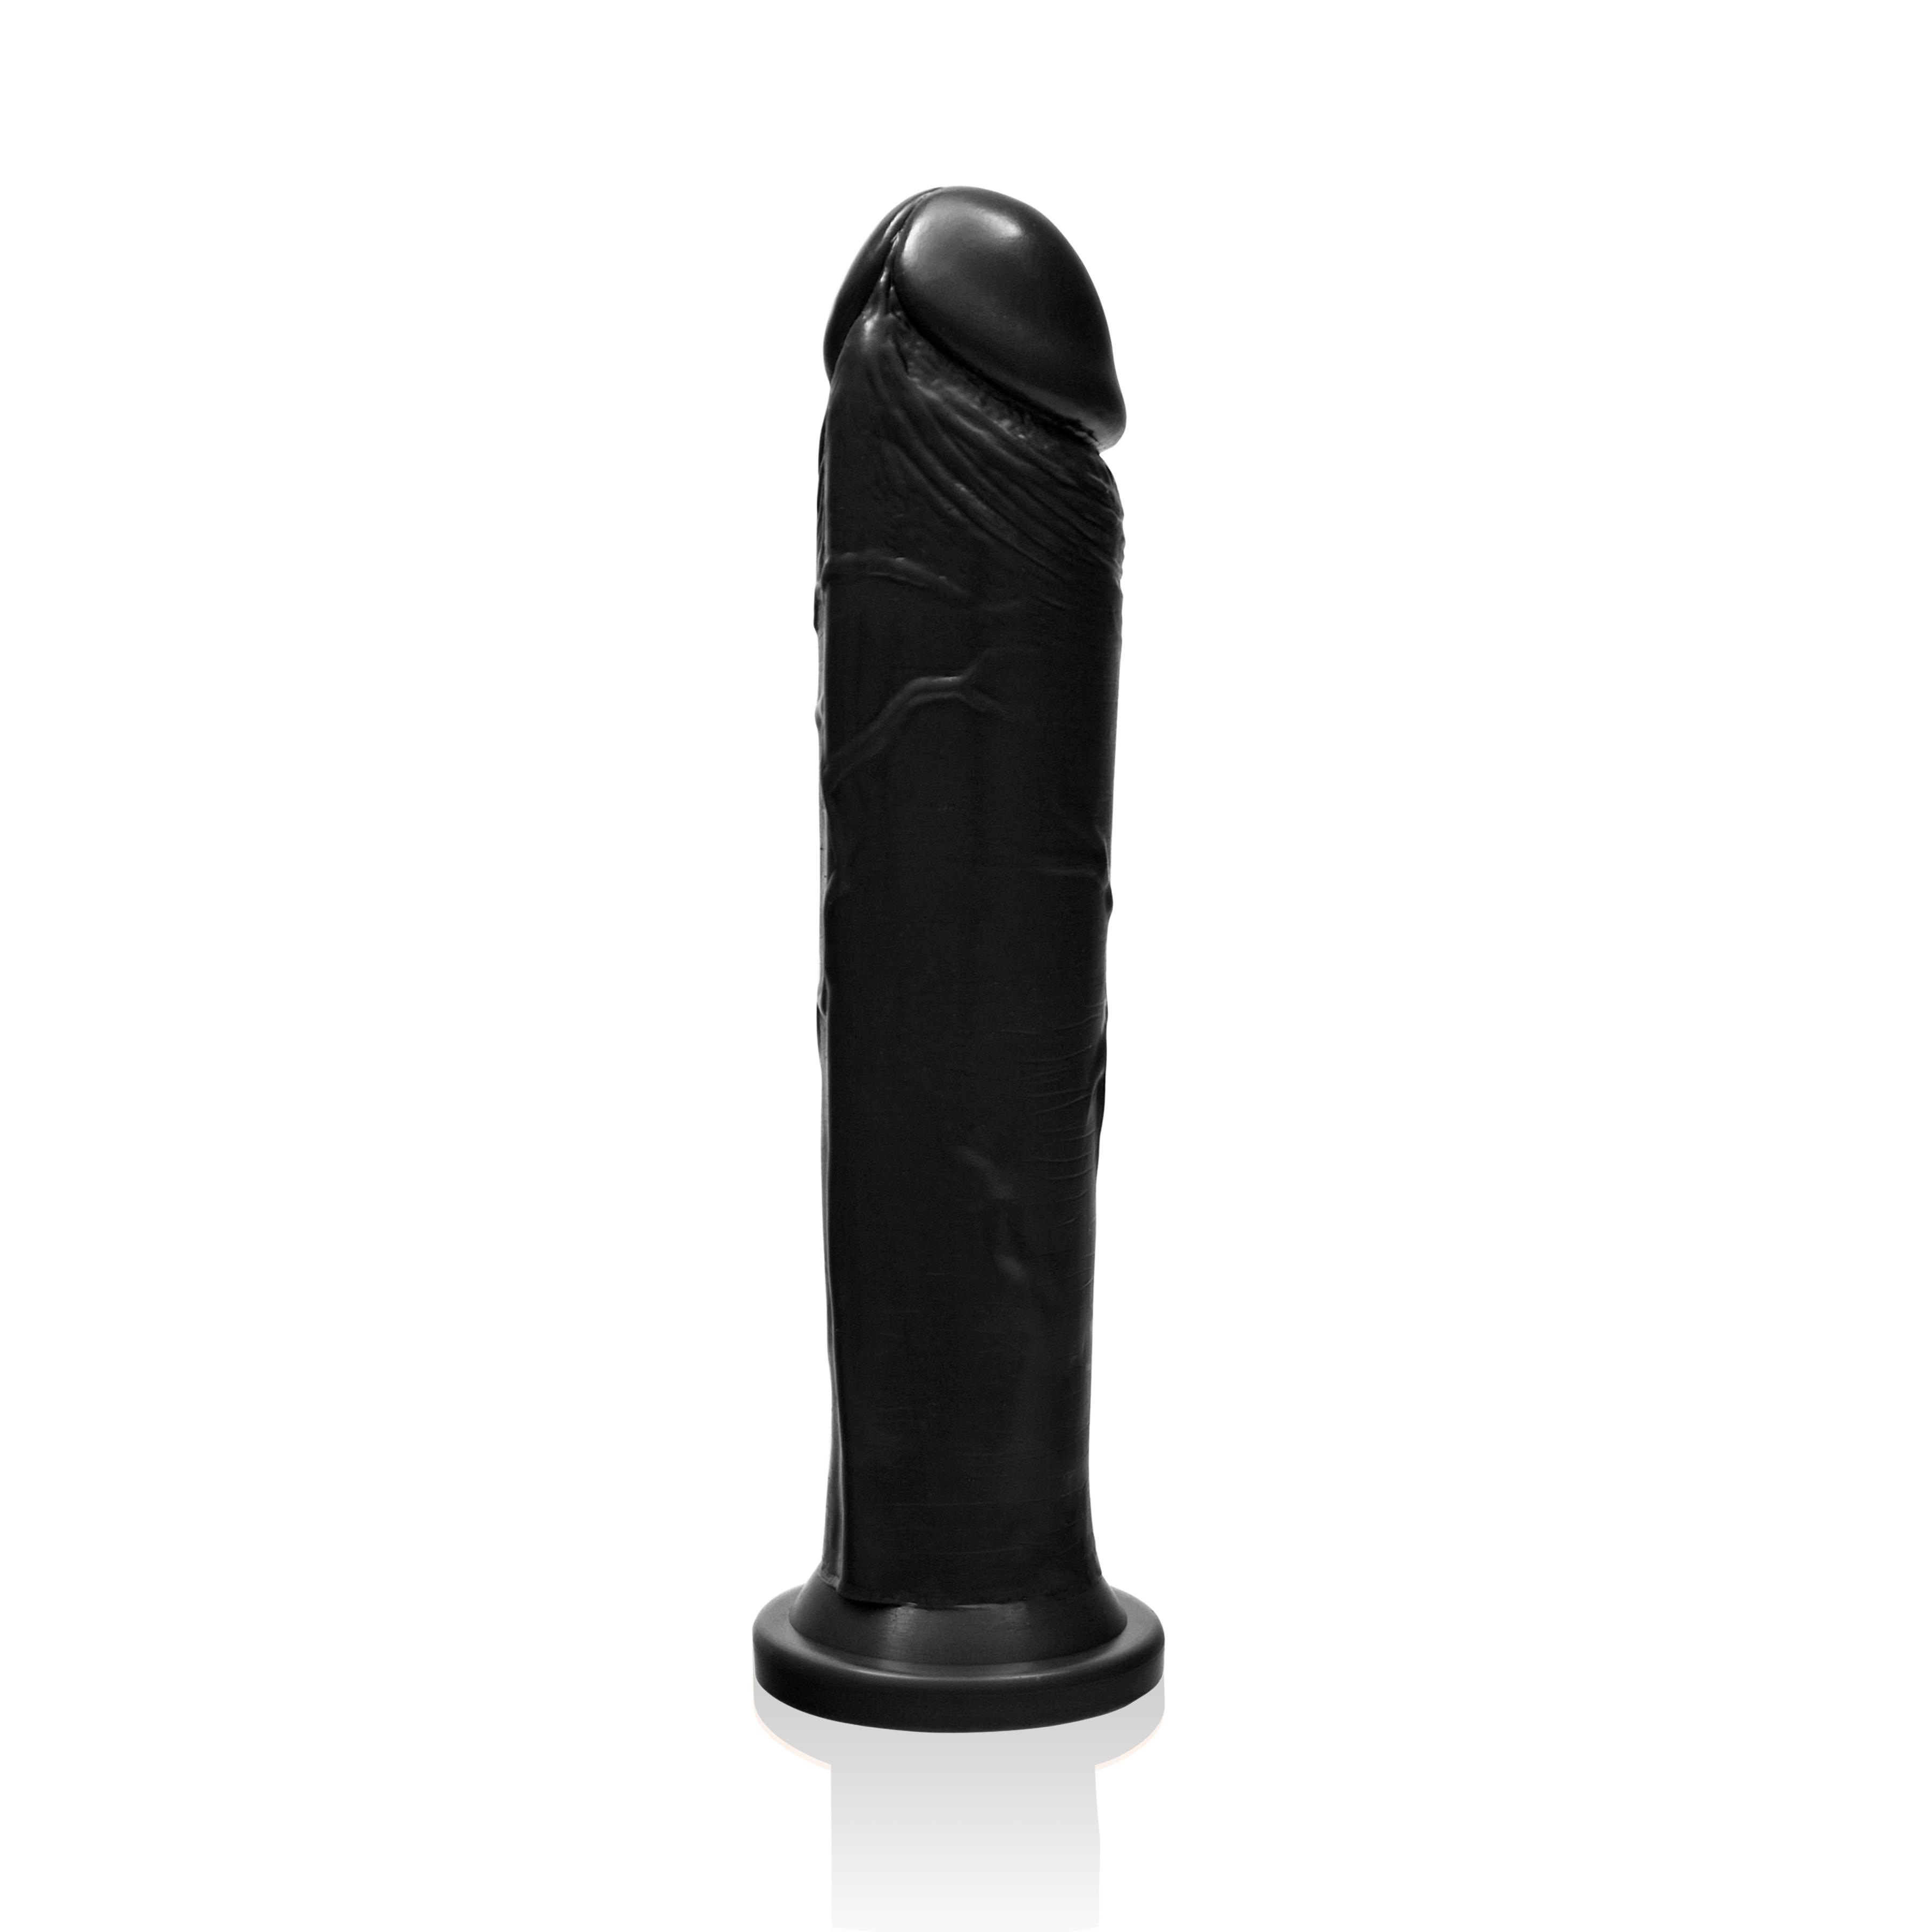 SI IGNITE Cock with Suction, 23 cm, Black